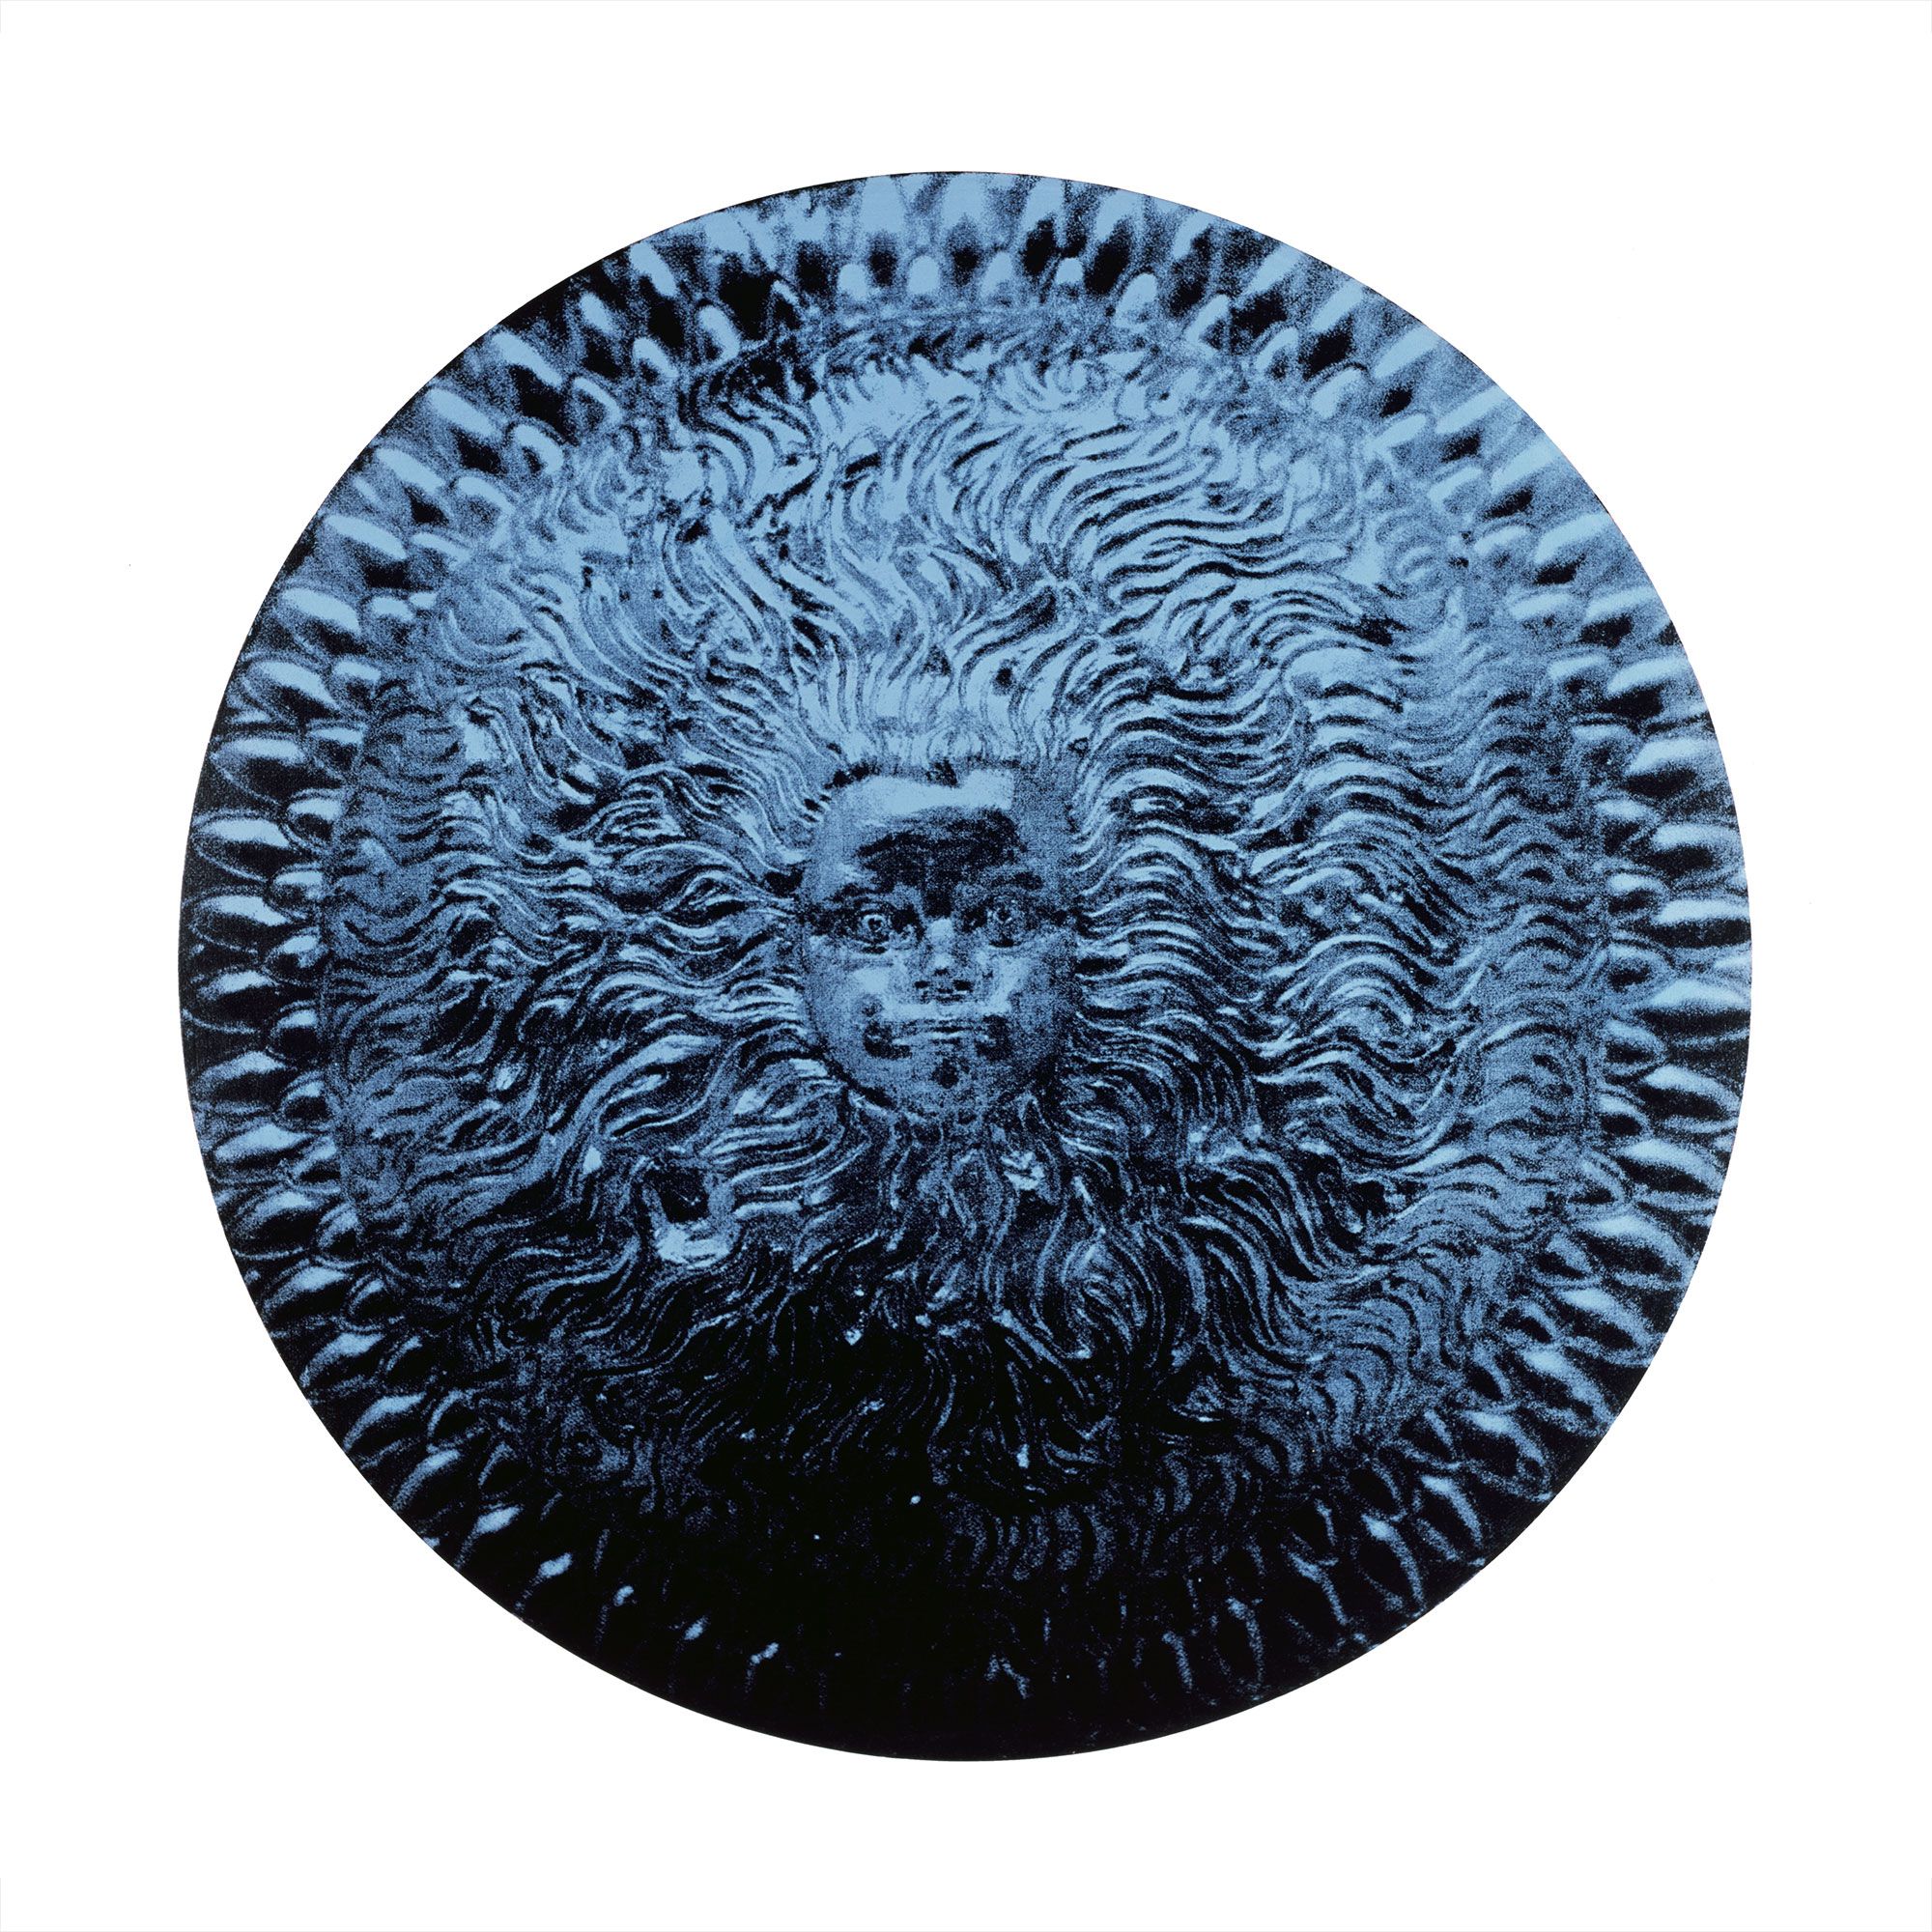 Oil on round canvas painting of a child's face in centre of Greek battle shield in blue.